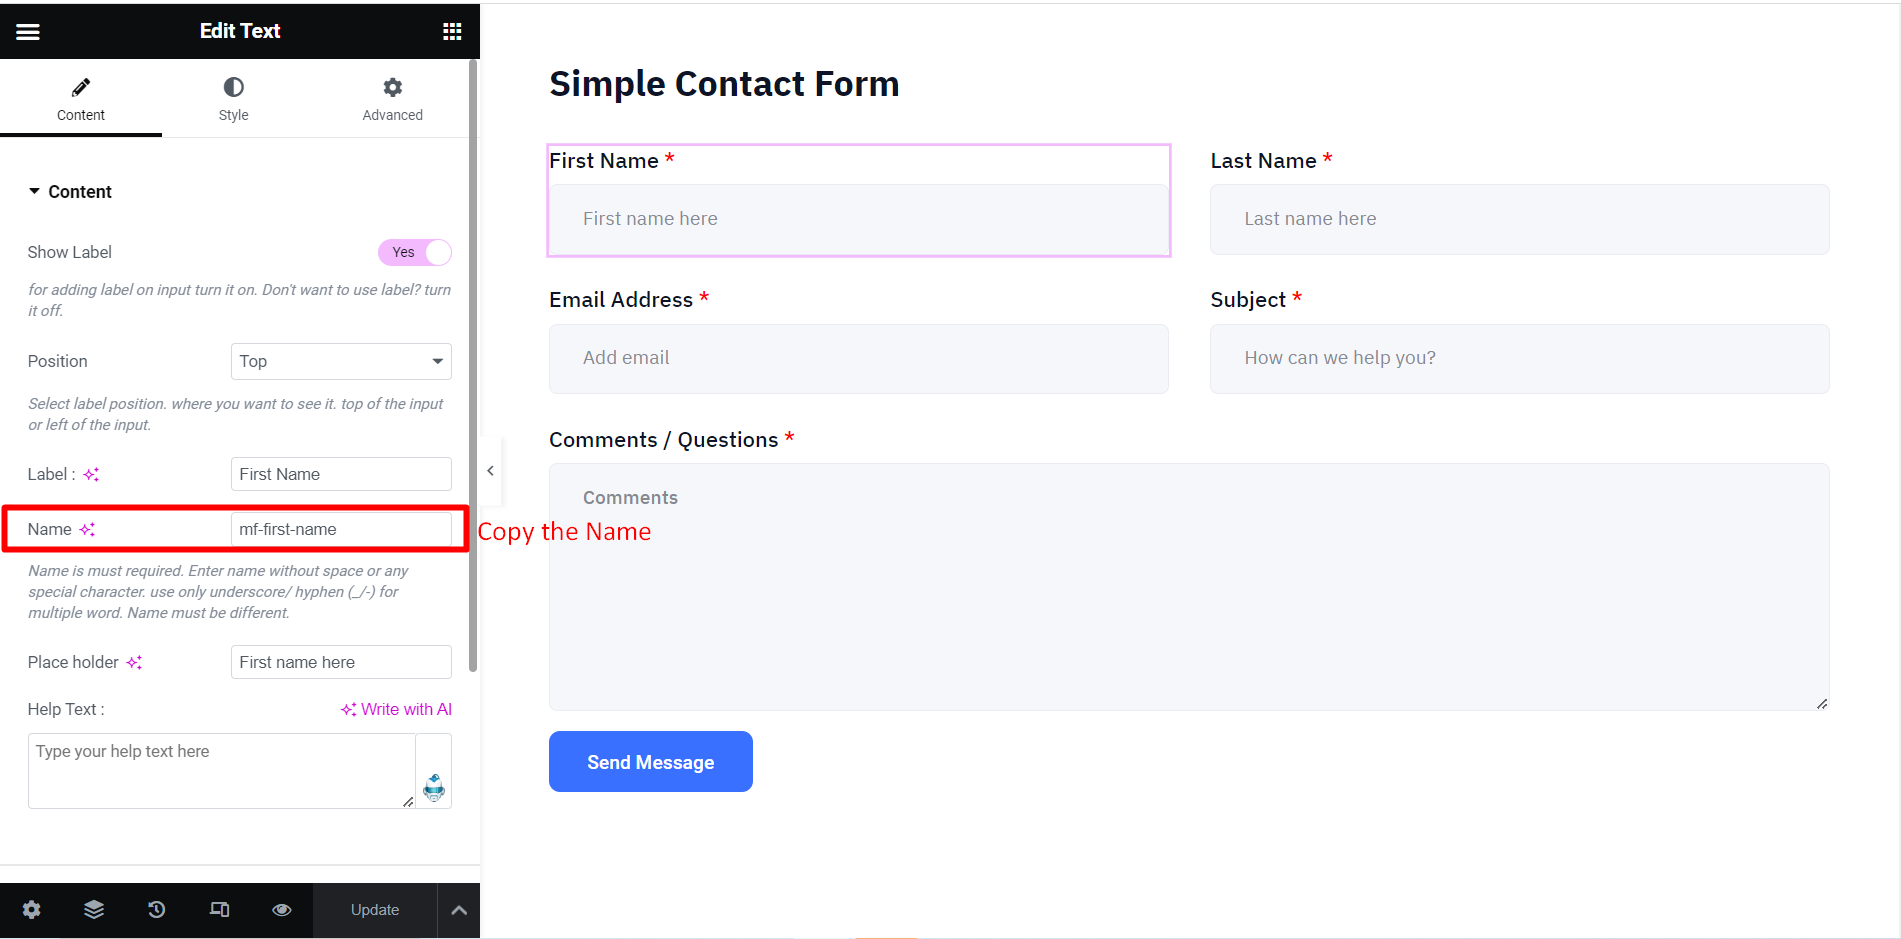 Copy the Name to pass data from one to another form